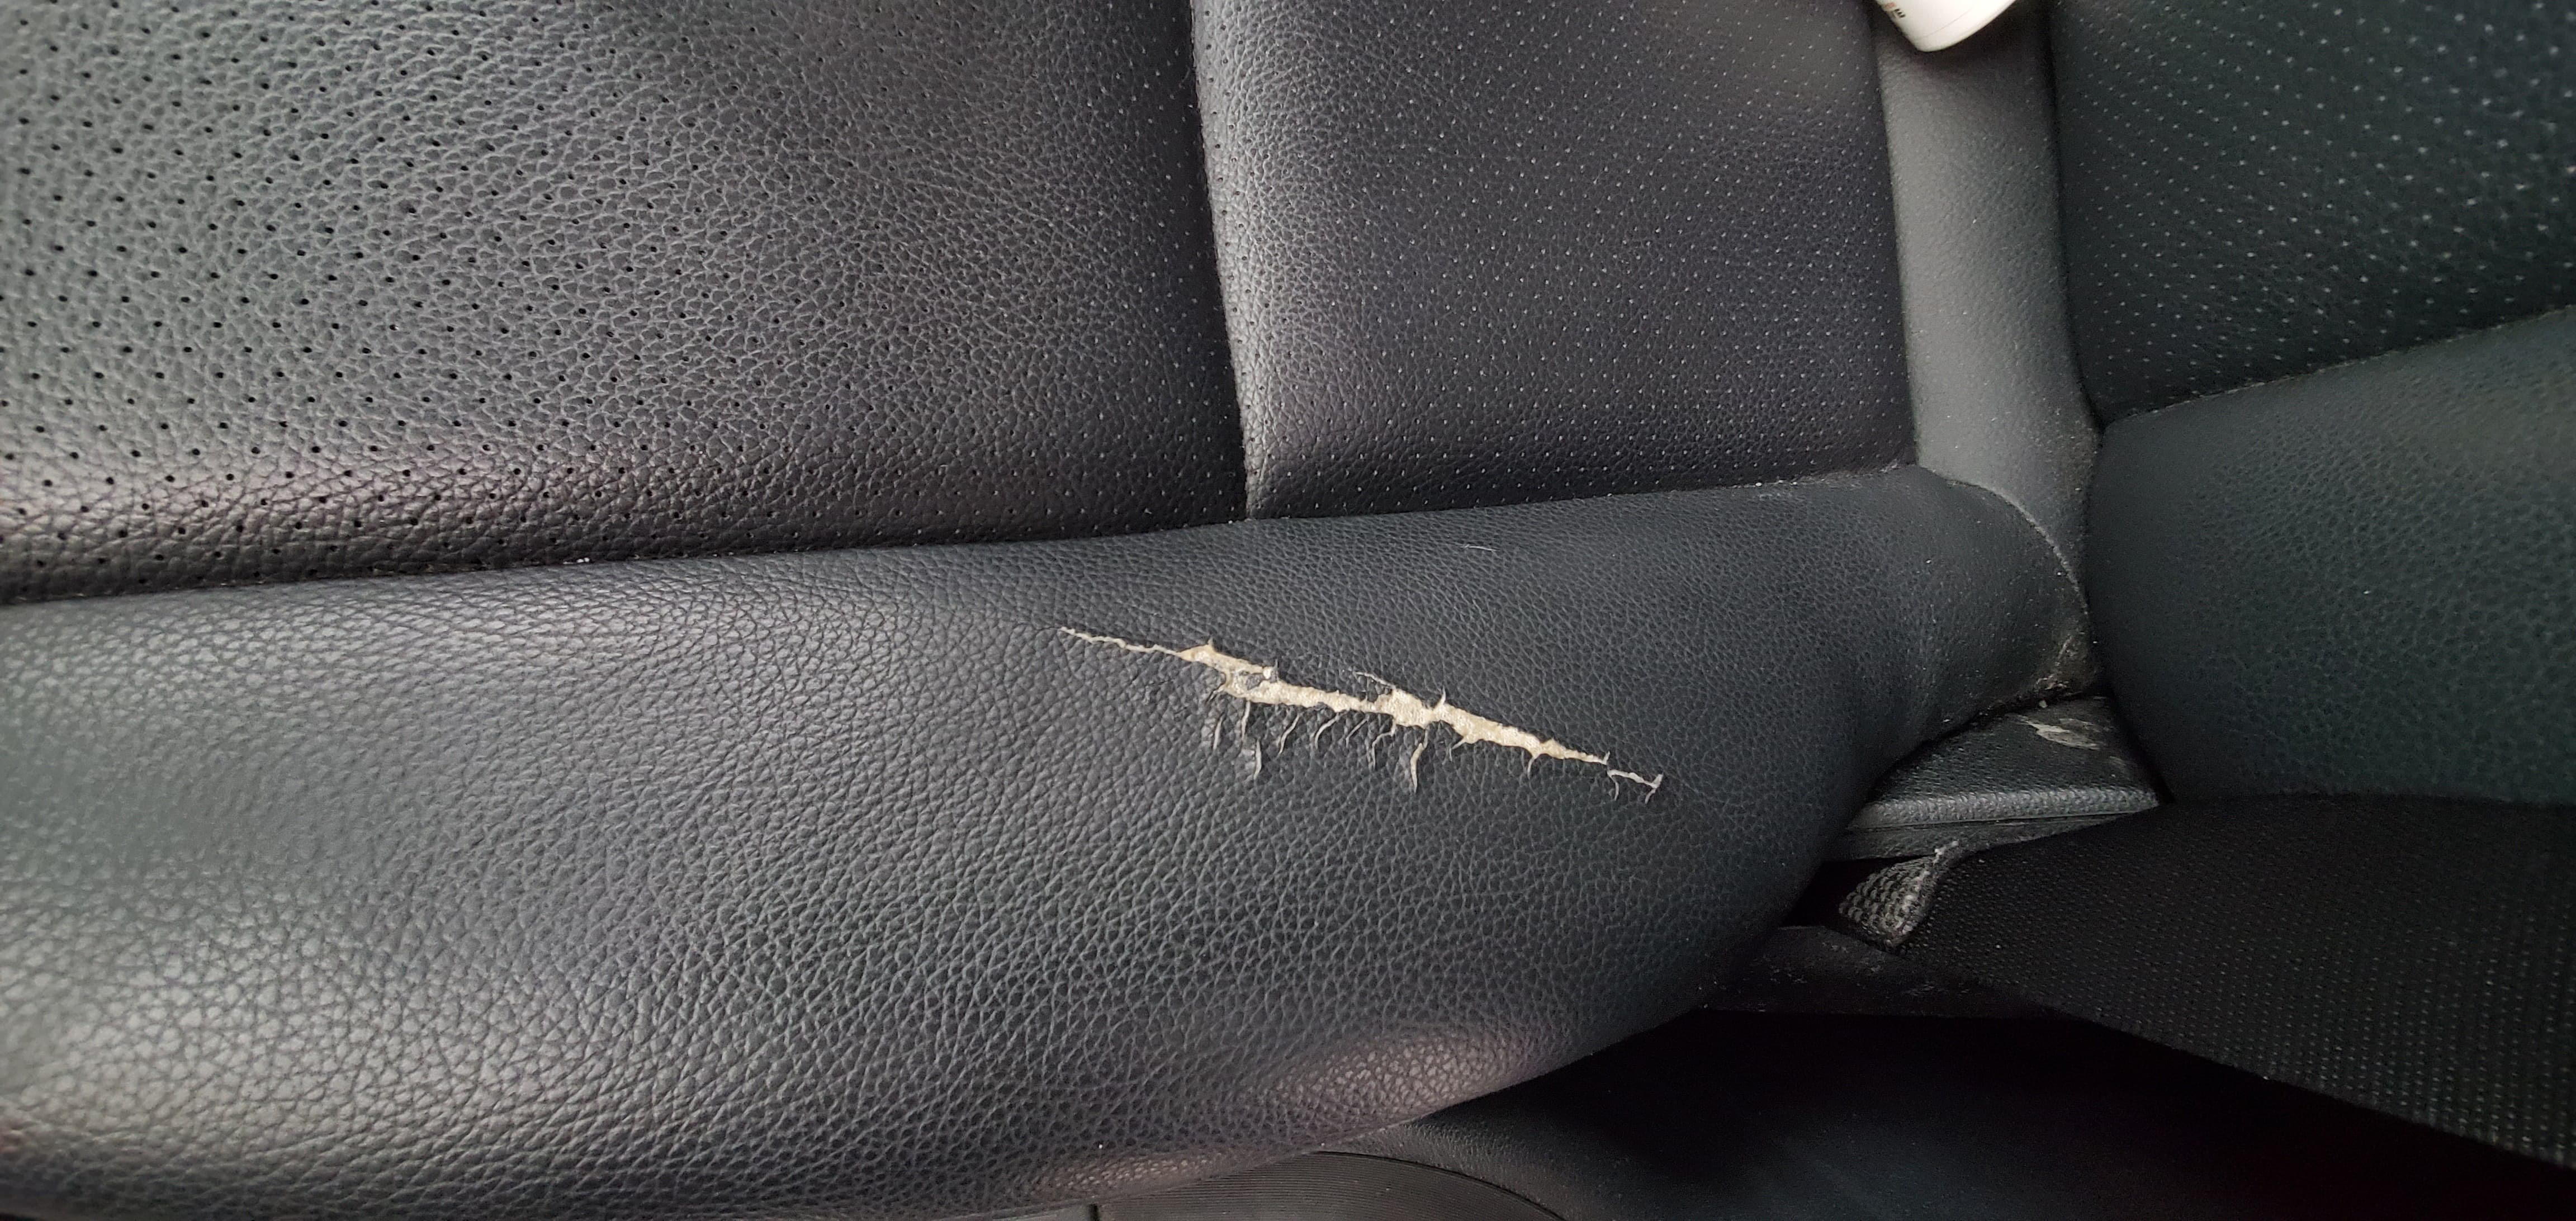 How To Repair A Leather Car Seat, How Much To Fix Tear In Leather Car Seat